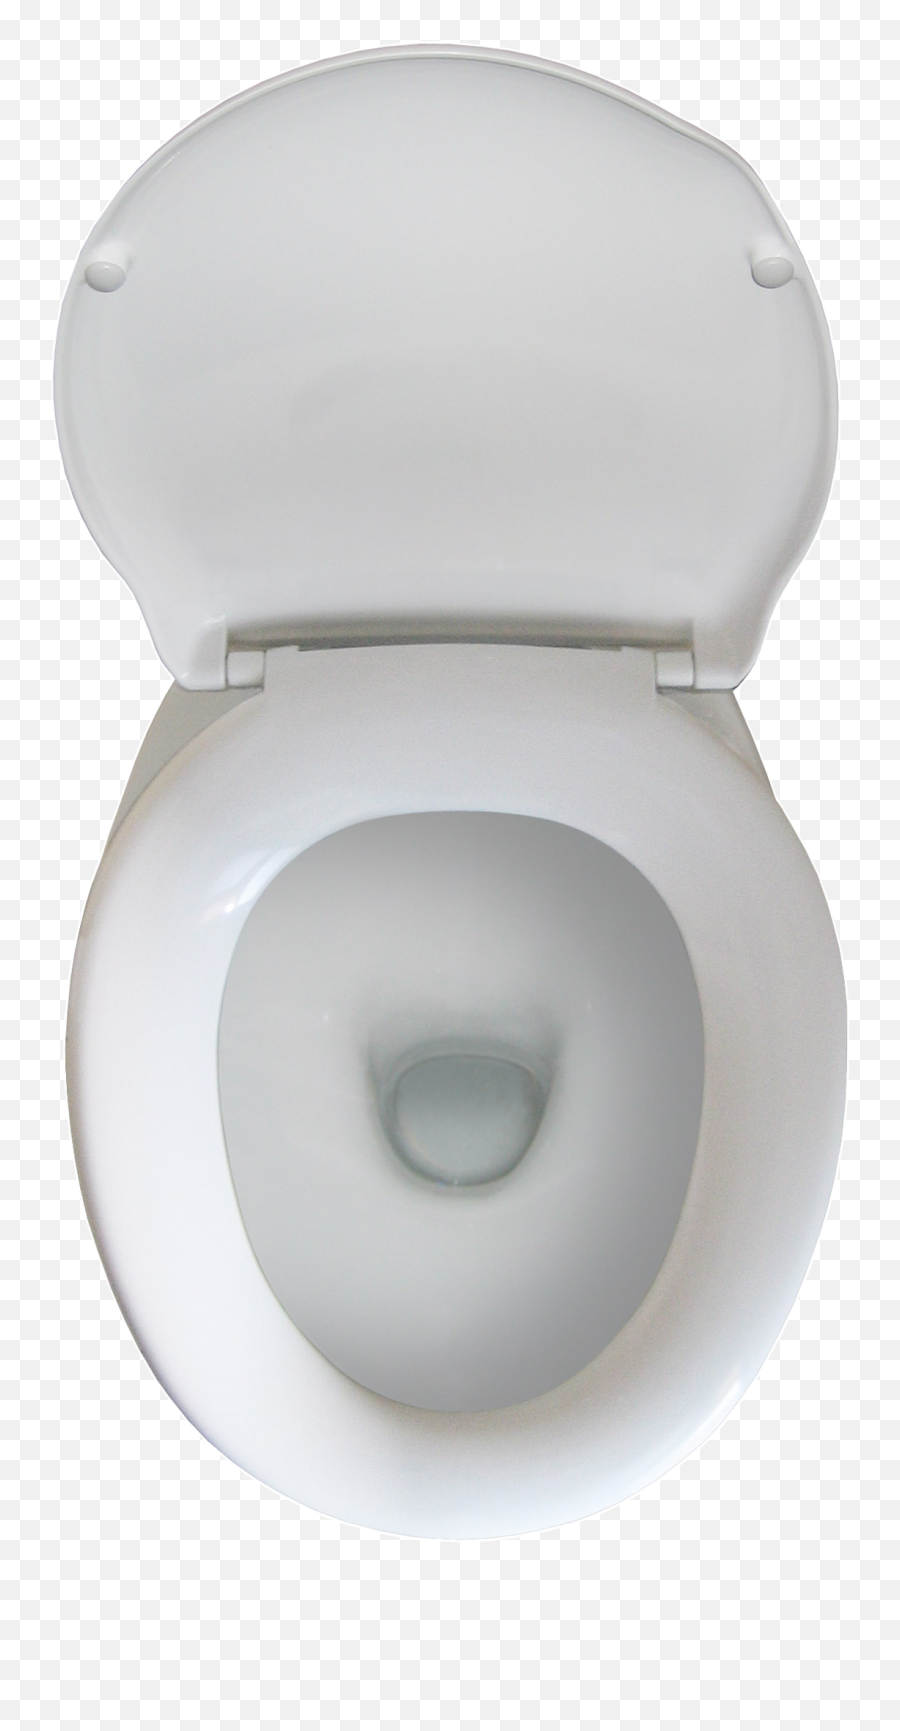 Download Toilet Png Image For Free Bathroom